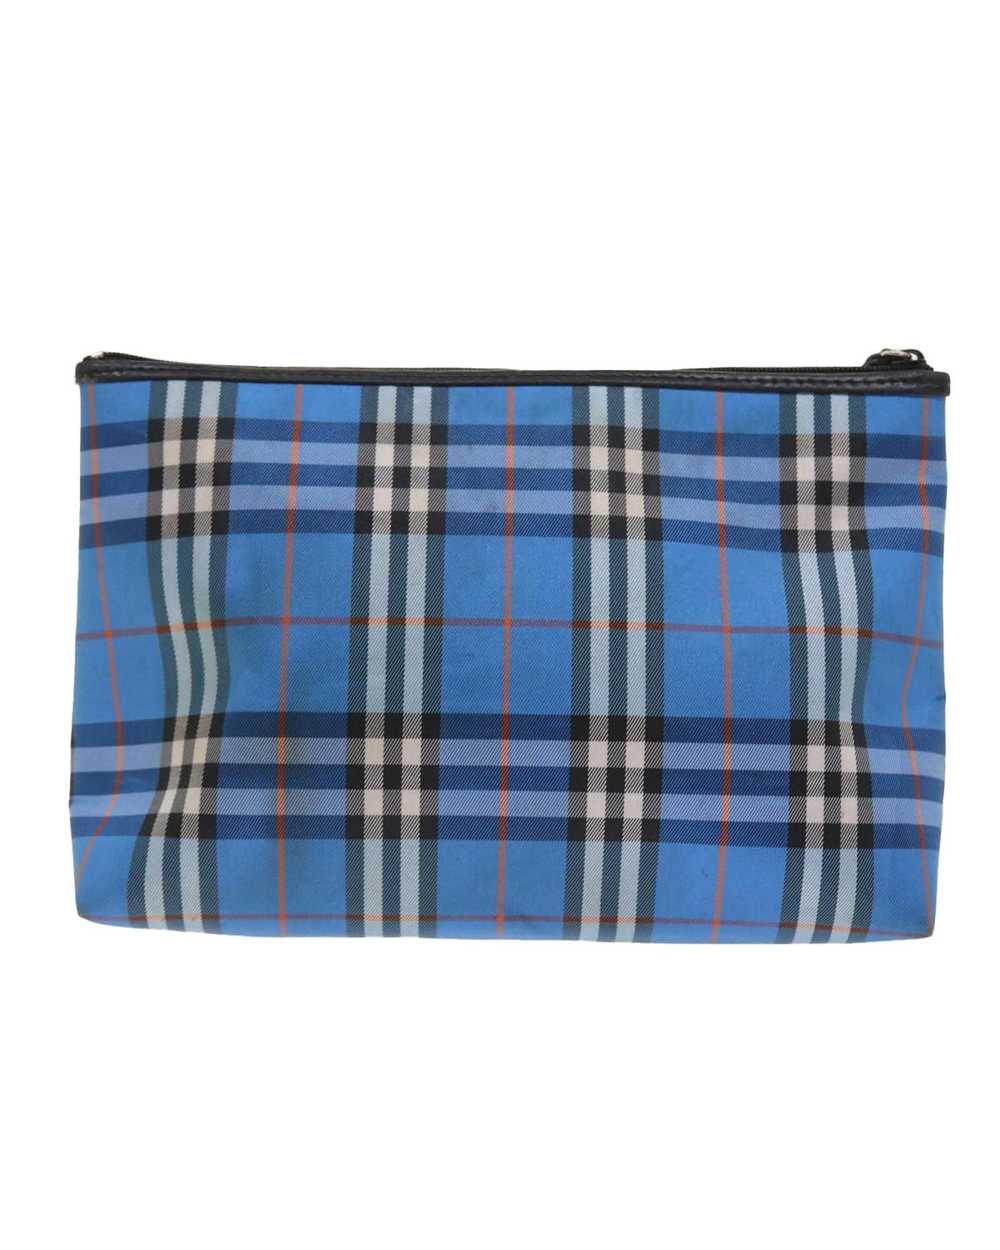 Burberry Blue Nylon Pouch with Check Print - image 2